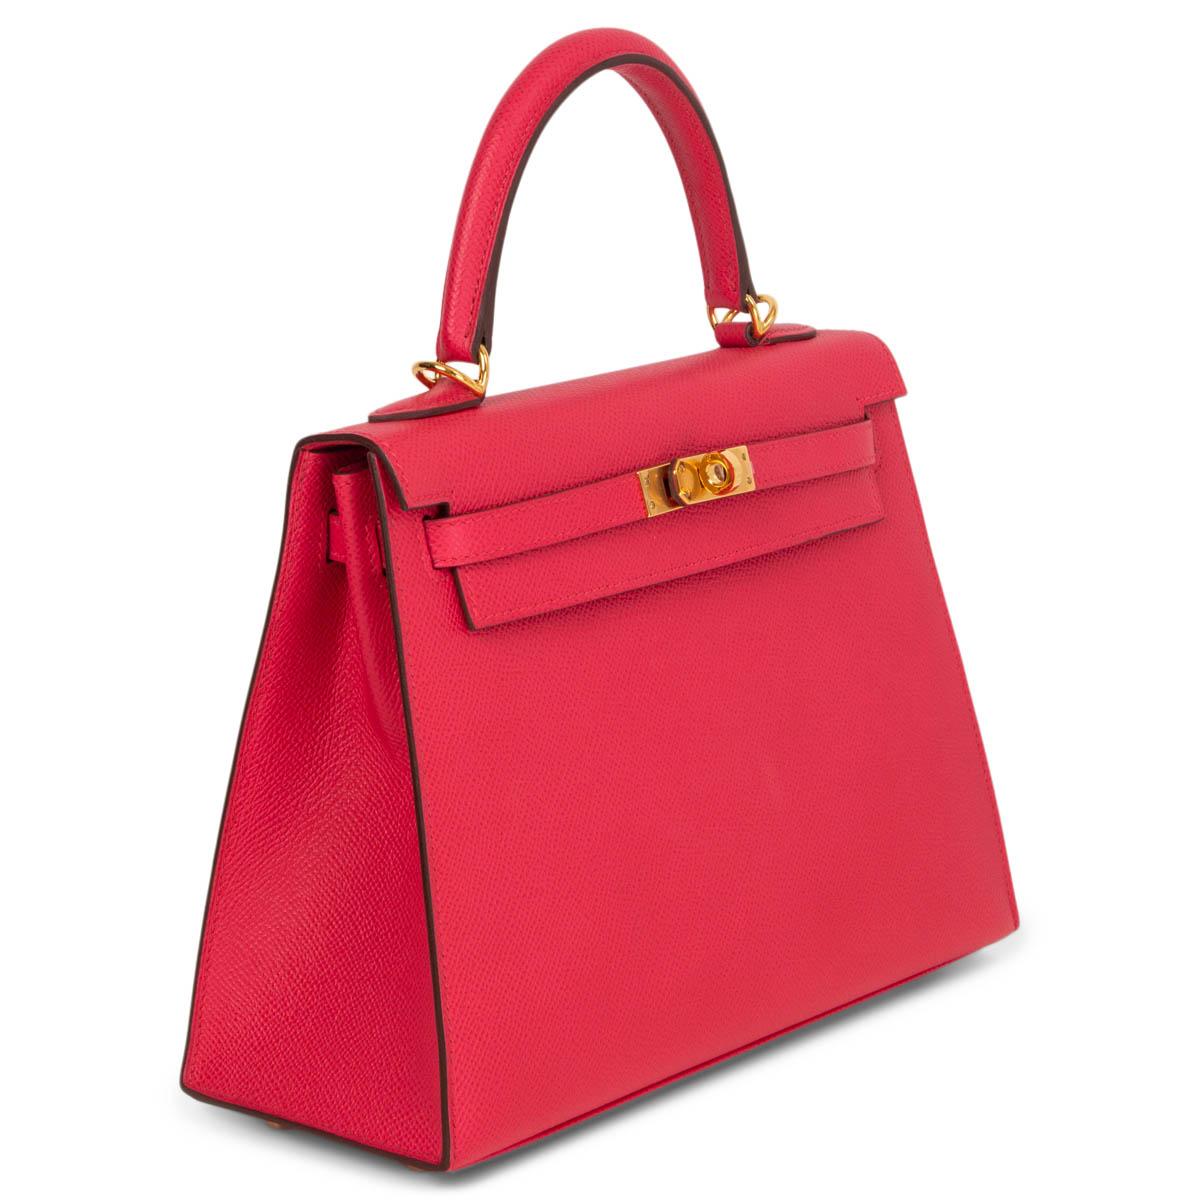 100% authentic Hermes 'Kelly 25 Sellier' bag in Rose Extreme (hot pink) Veau Epsom leather with gold-plated hardware. Lined in Chevre (goat skin) with two open pockets against the front and a zipper pocket against the back. Brand new. Comes with